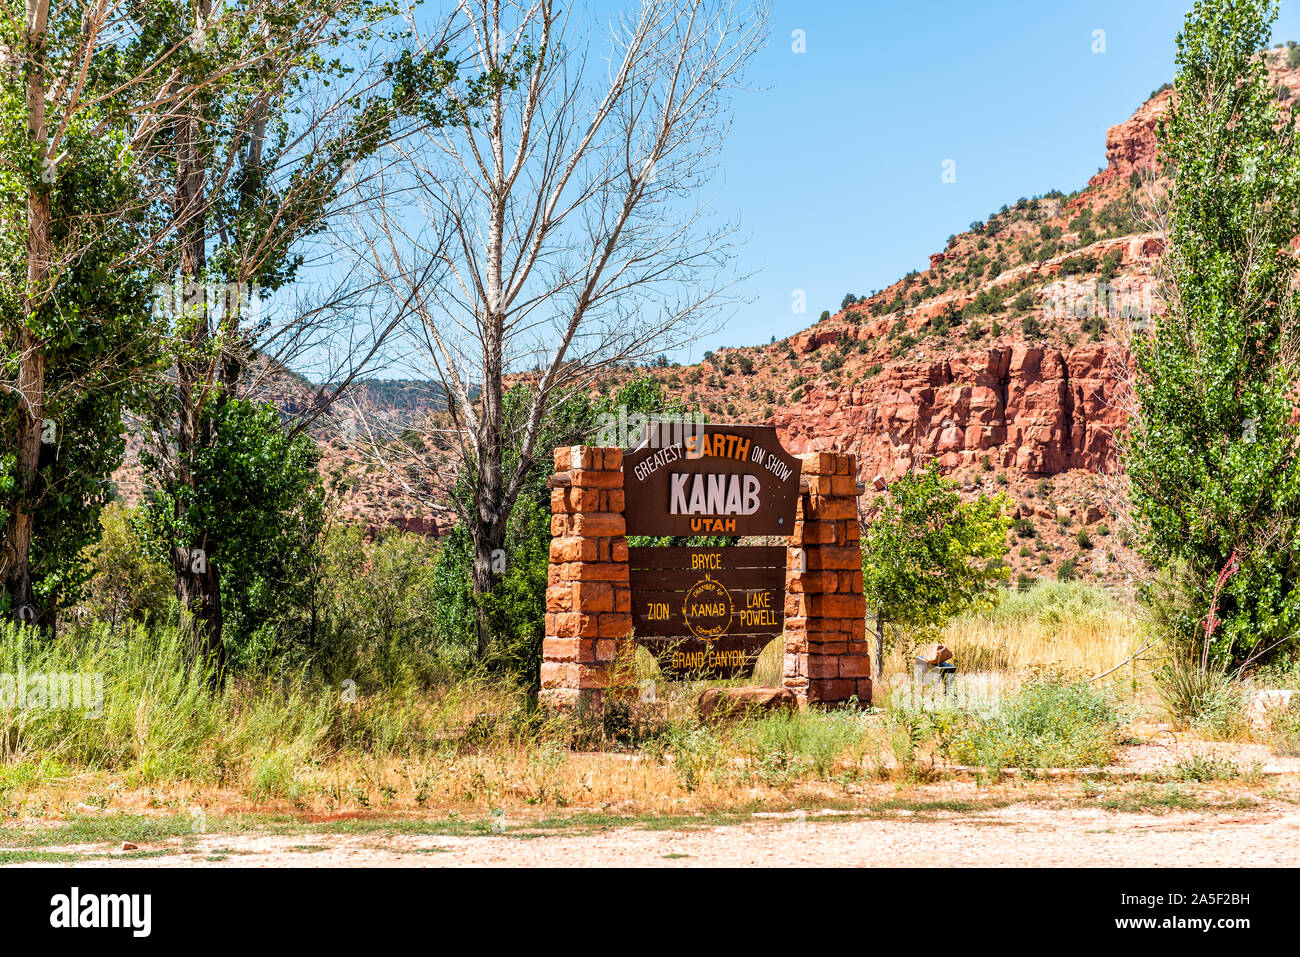 Kanab, USA - August 8, 2019: Closeup of sign for entrance to city near Bryce, Lake Powell and Zion National Park in Utah Stock Photo